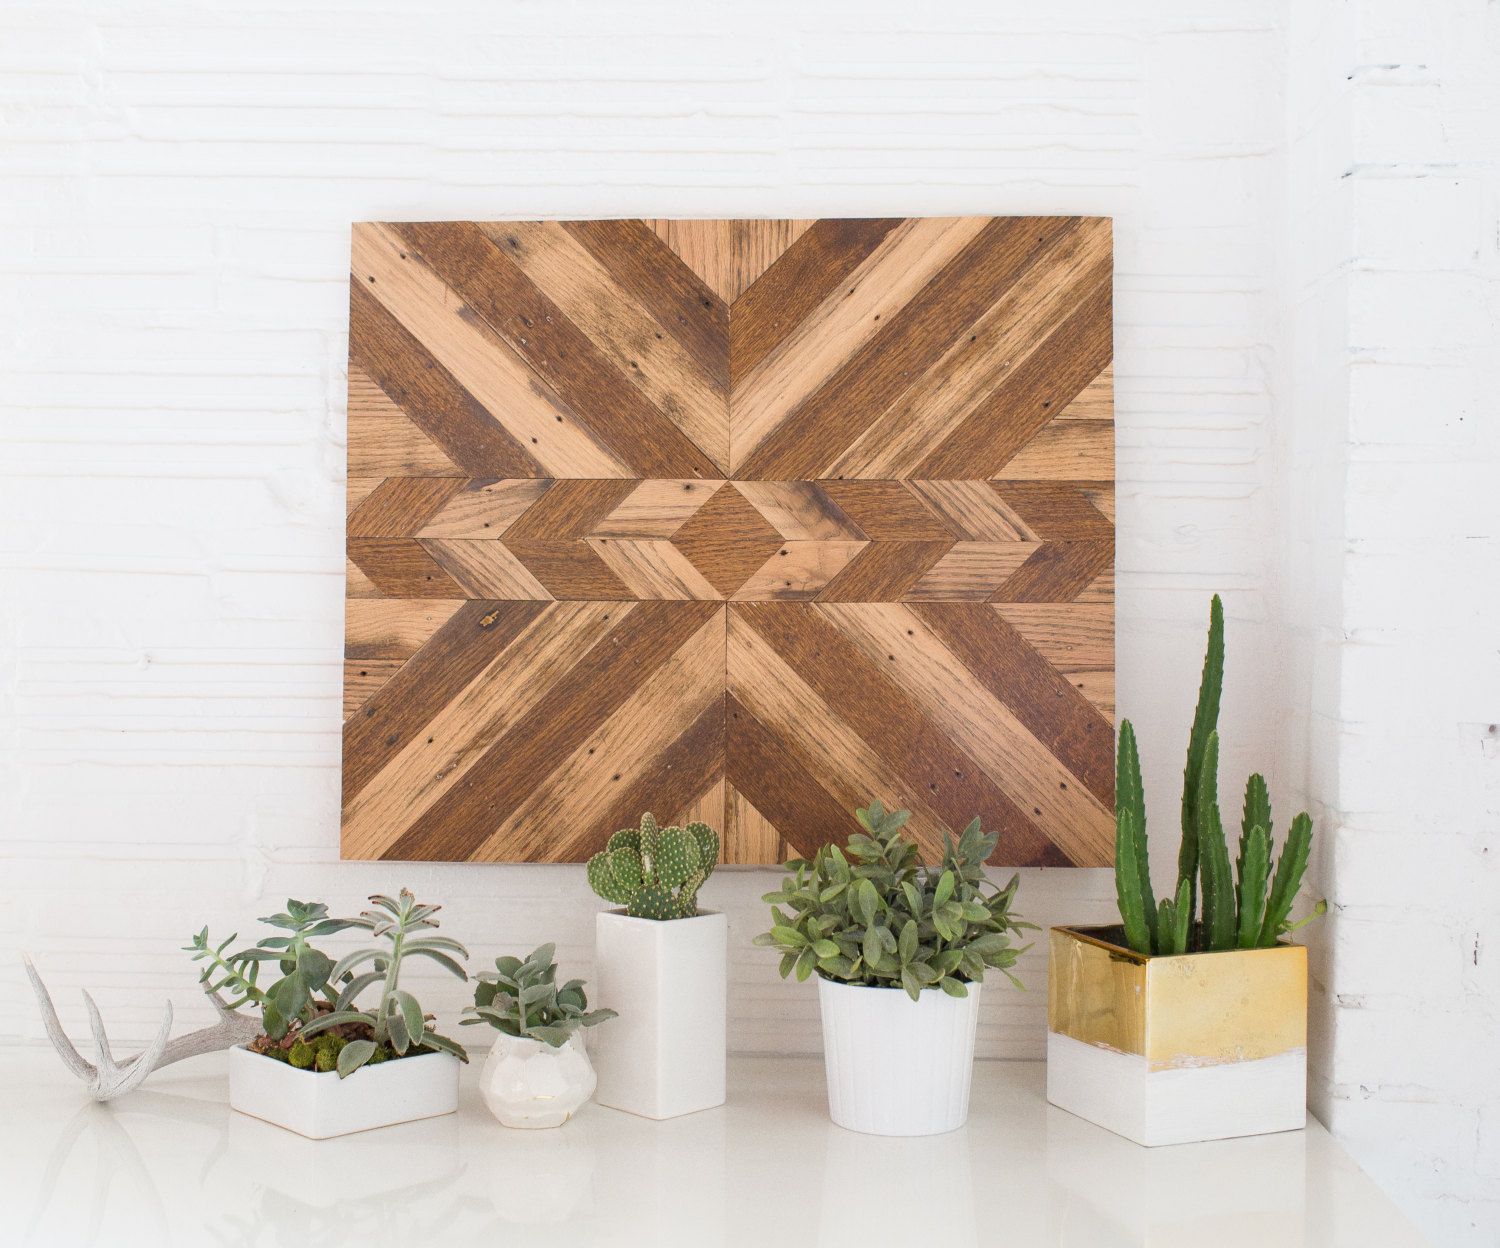 Tribal Reclaimed Wood Wall Panel Art With Diamond And Chevron Pertaining To Most Current Urban Tribal Wood Wall Art (View 15 of 20)